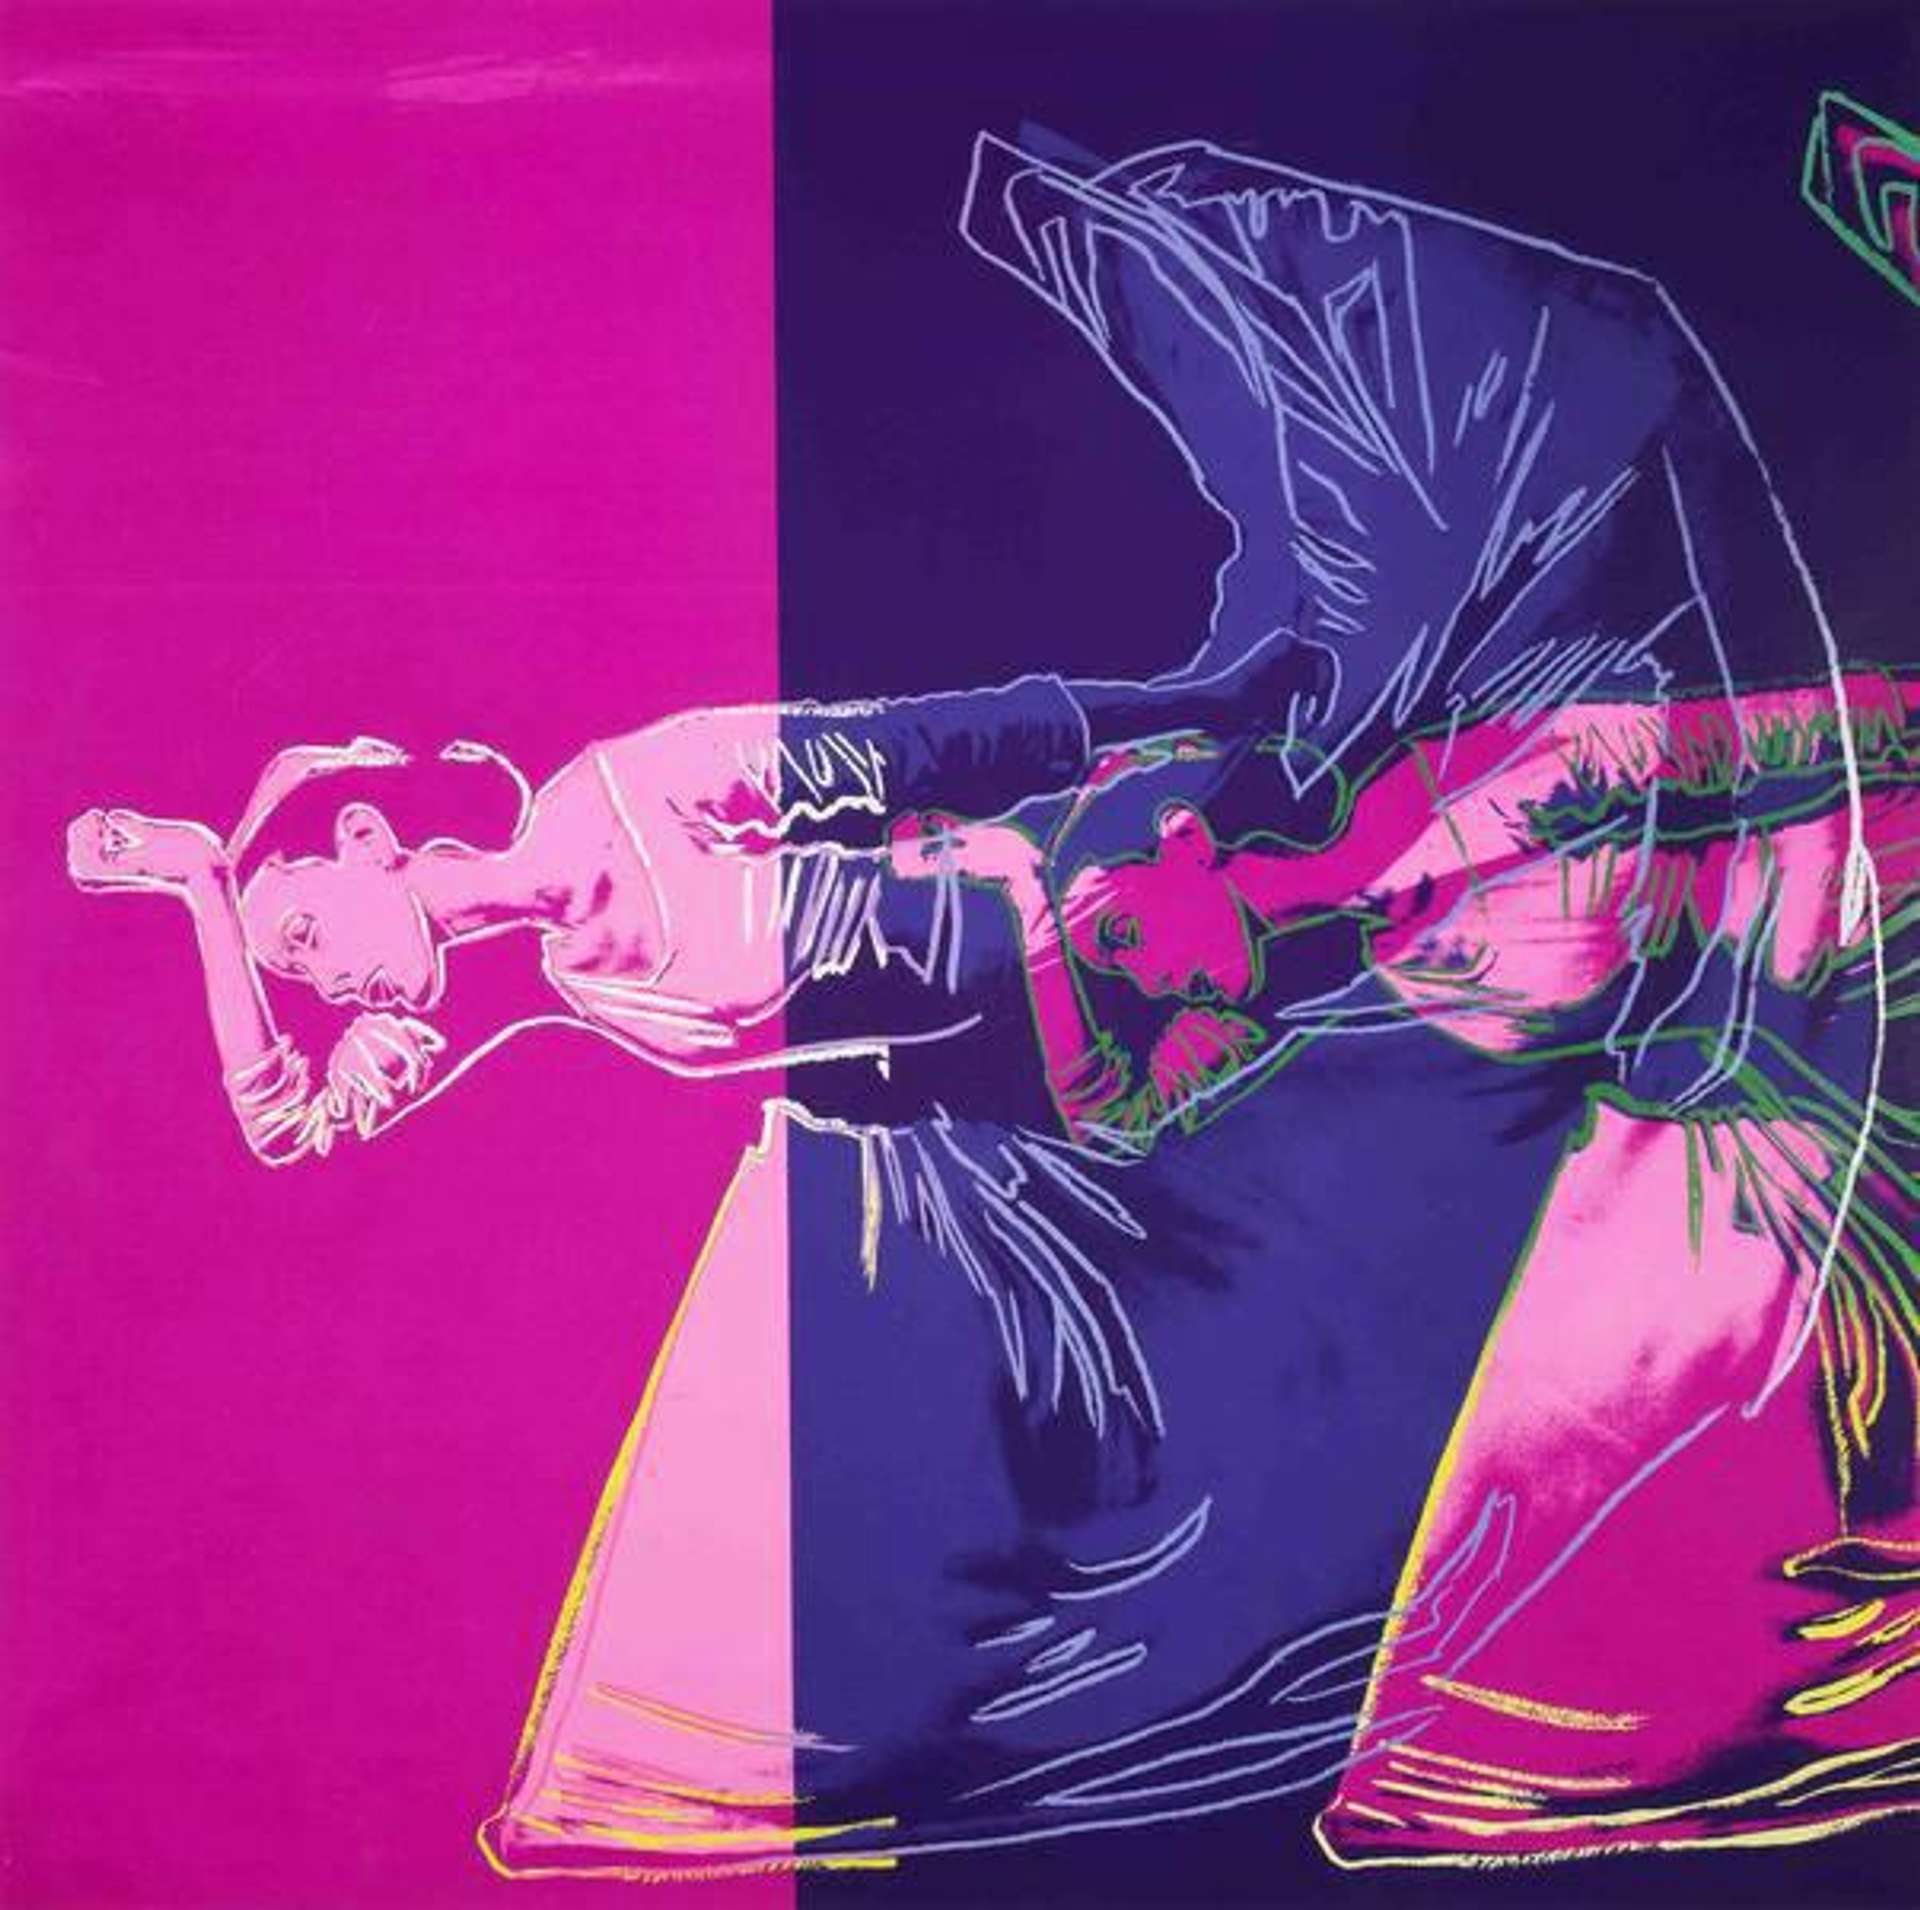 Andy Warhol: Letter To The World (The Kick) - Signed Print